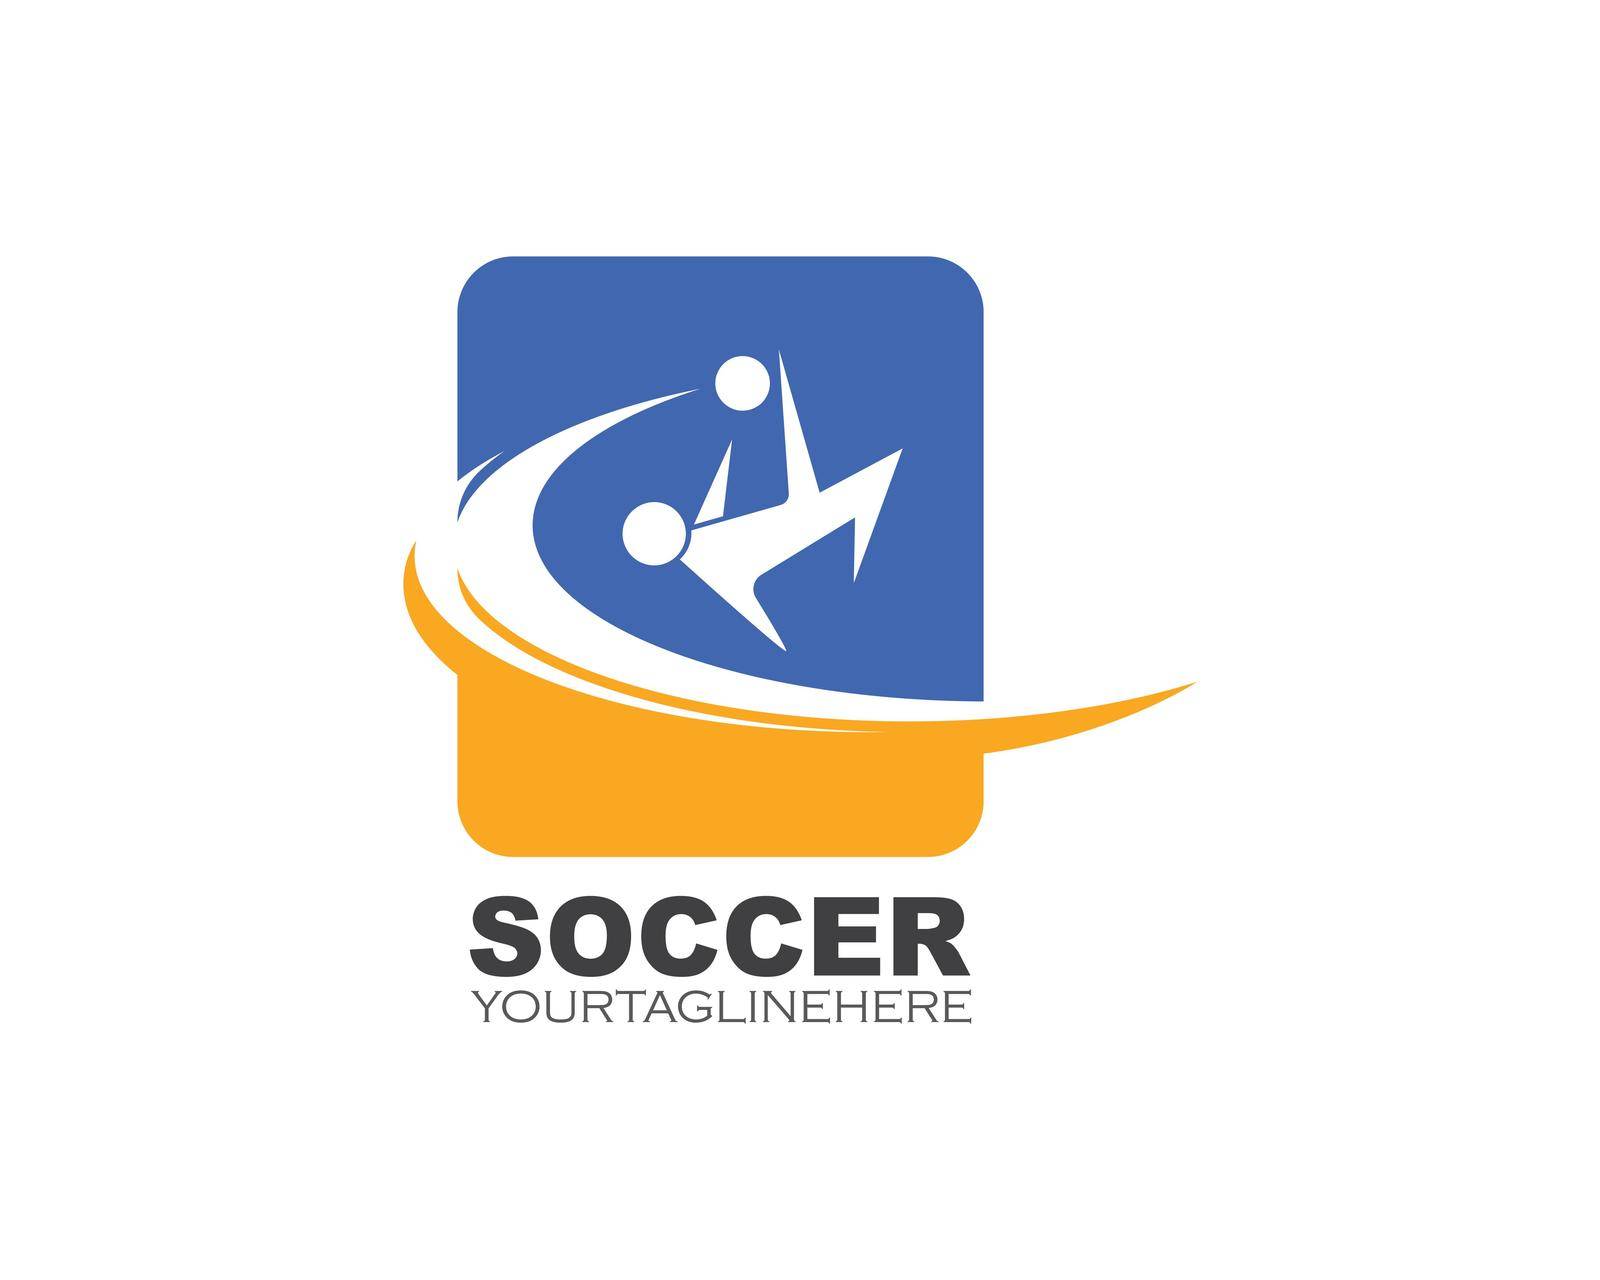 soccer logo and icon illustration vector by idan